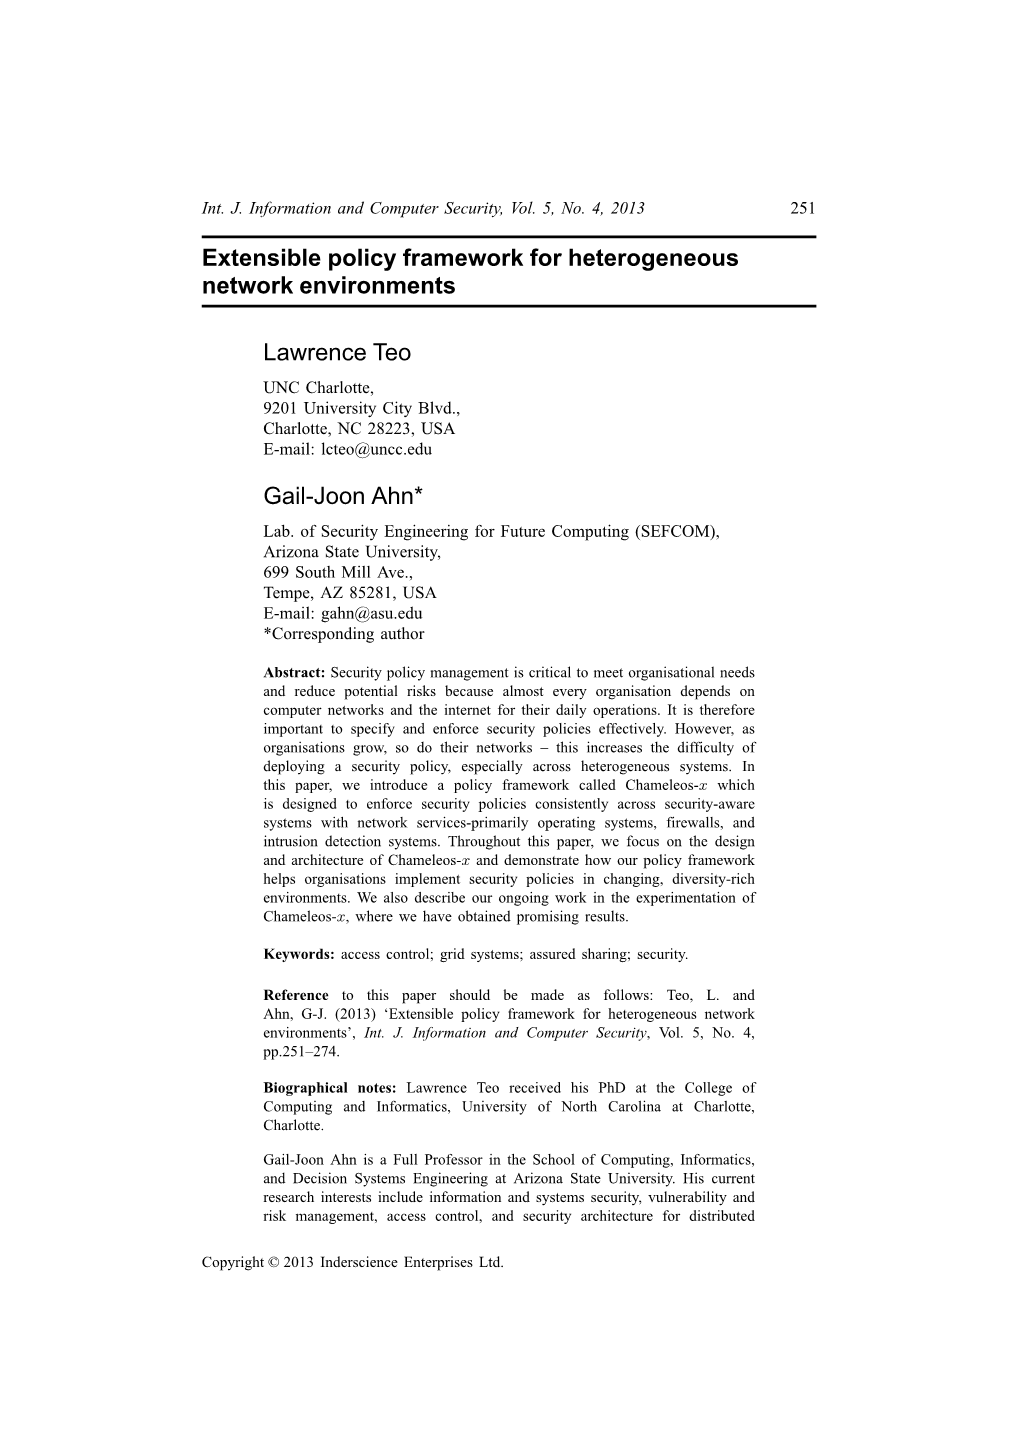 Extensible Policy Framework for Heterogeneous Network Environments